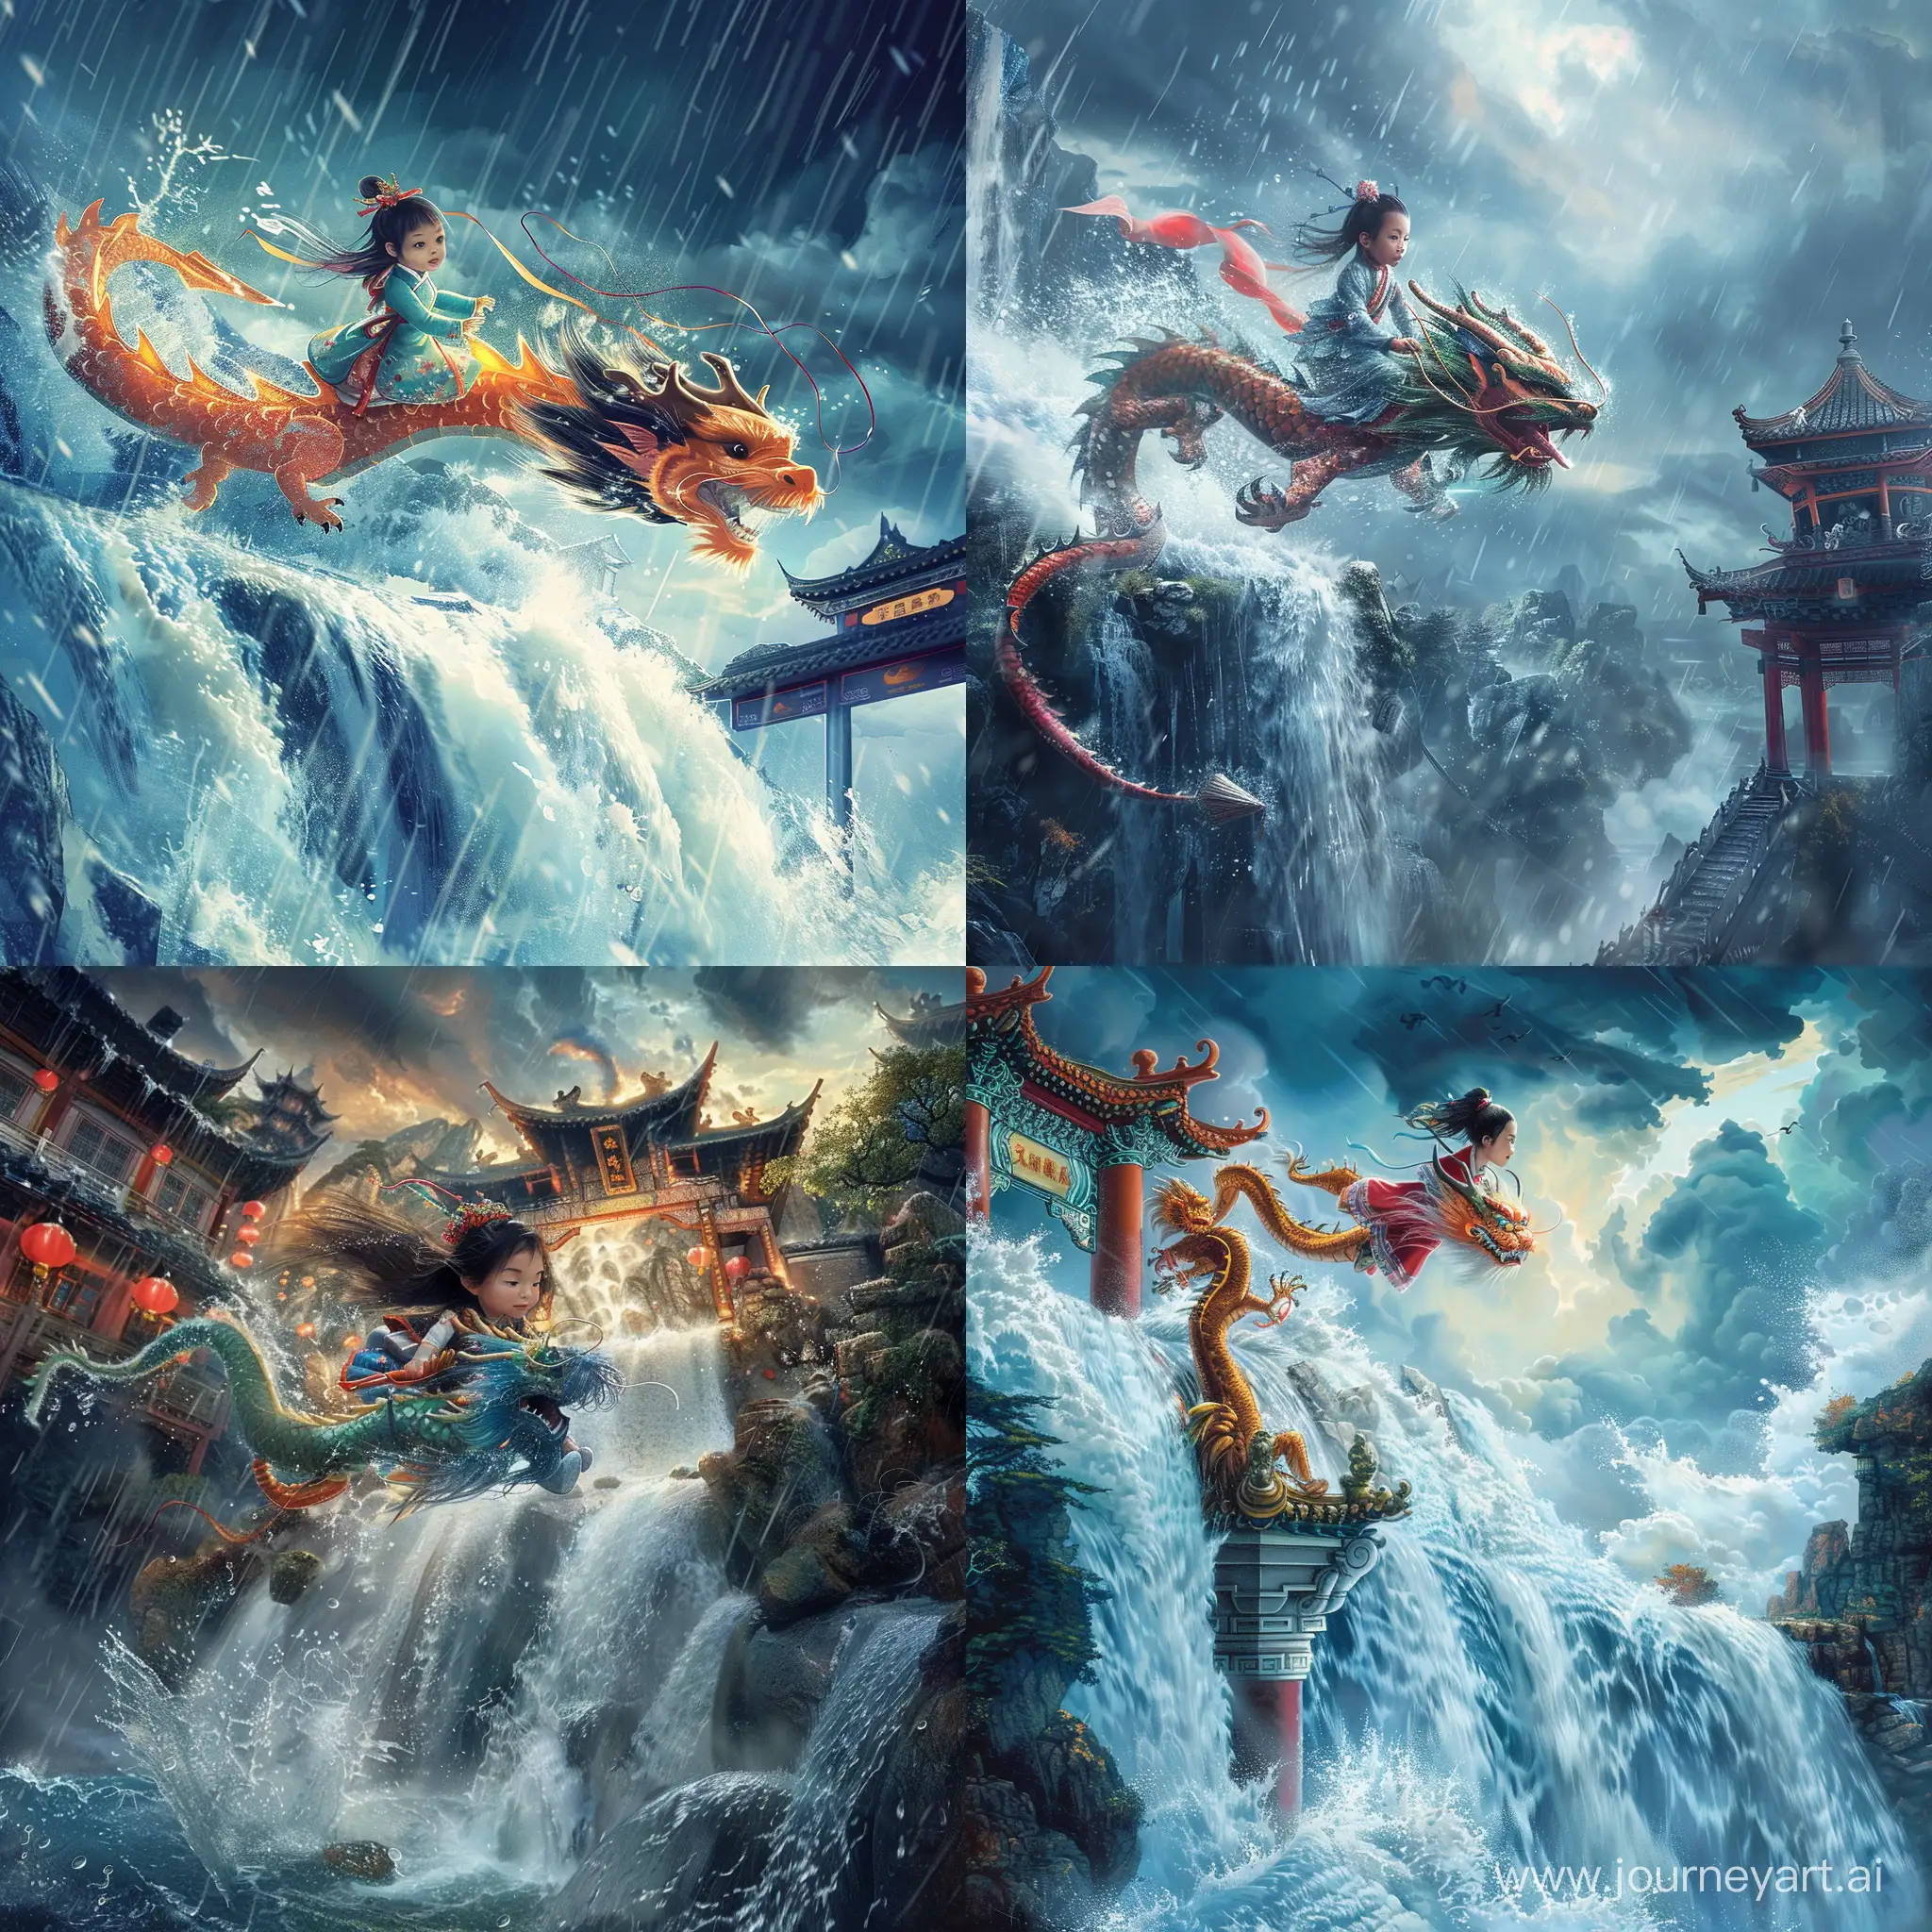 Chinese-Girl-Riding-Dragon-Over-Waterfall-in-Stormy-College-Weather